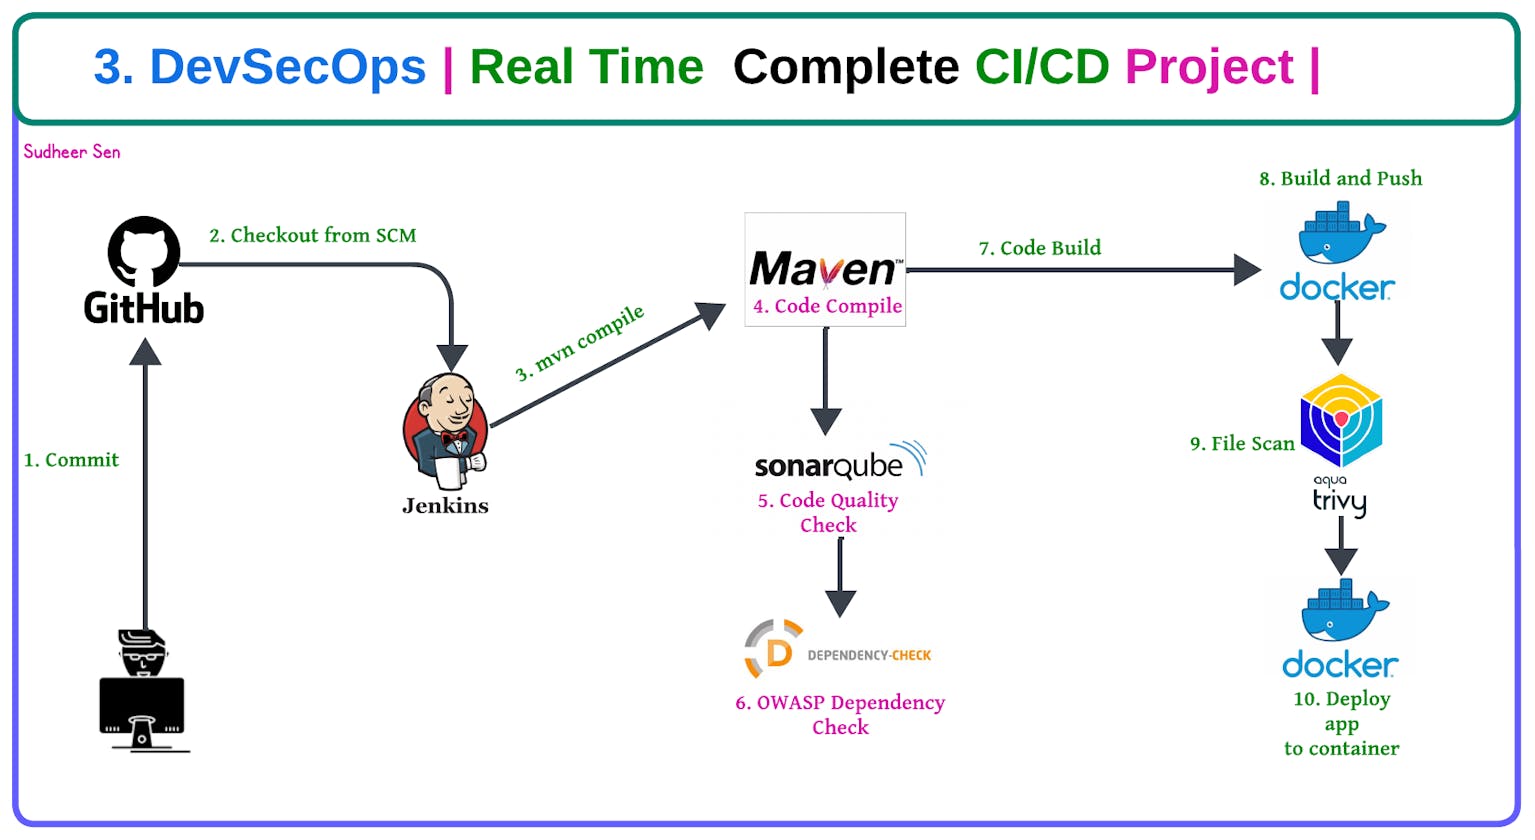 Project - 3. DevSecOps | Real Time Complete CI/CD Project